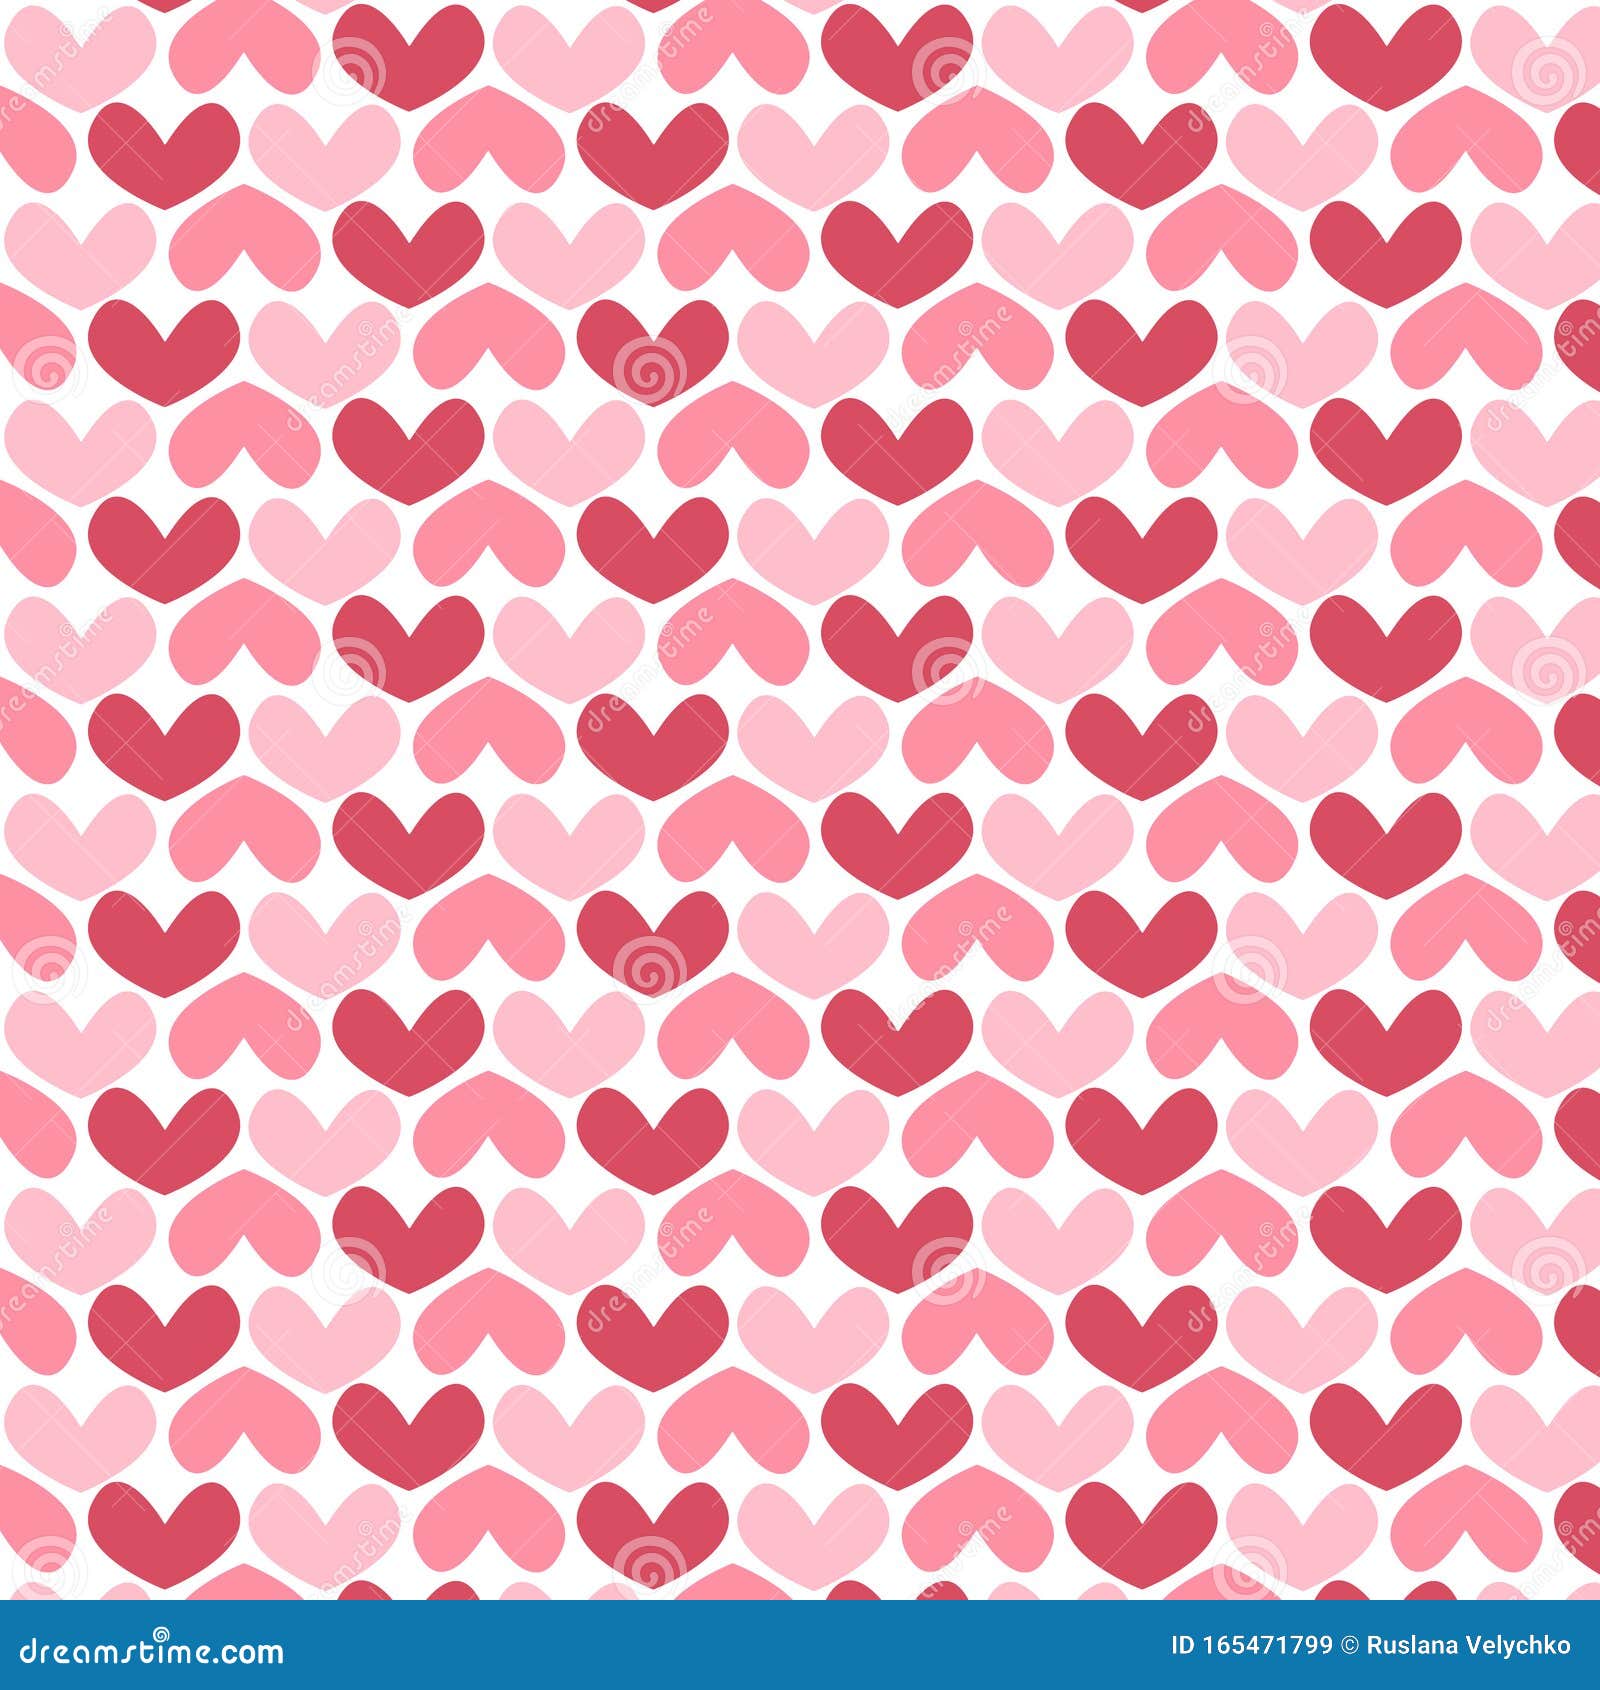 Seamless pattern of cute love hearts in cartoon style in bright